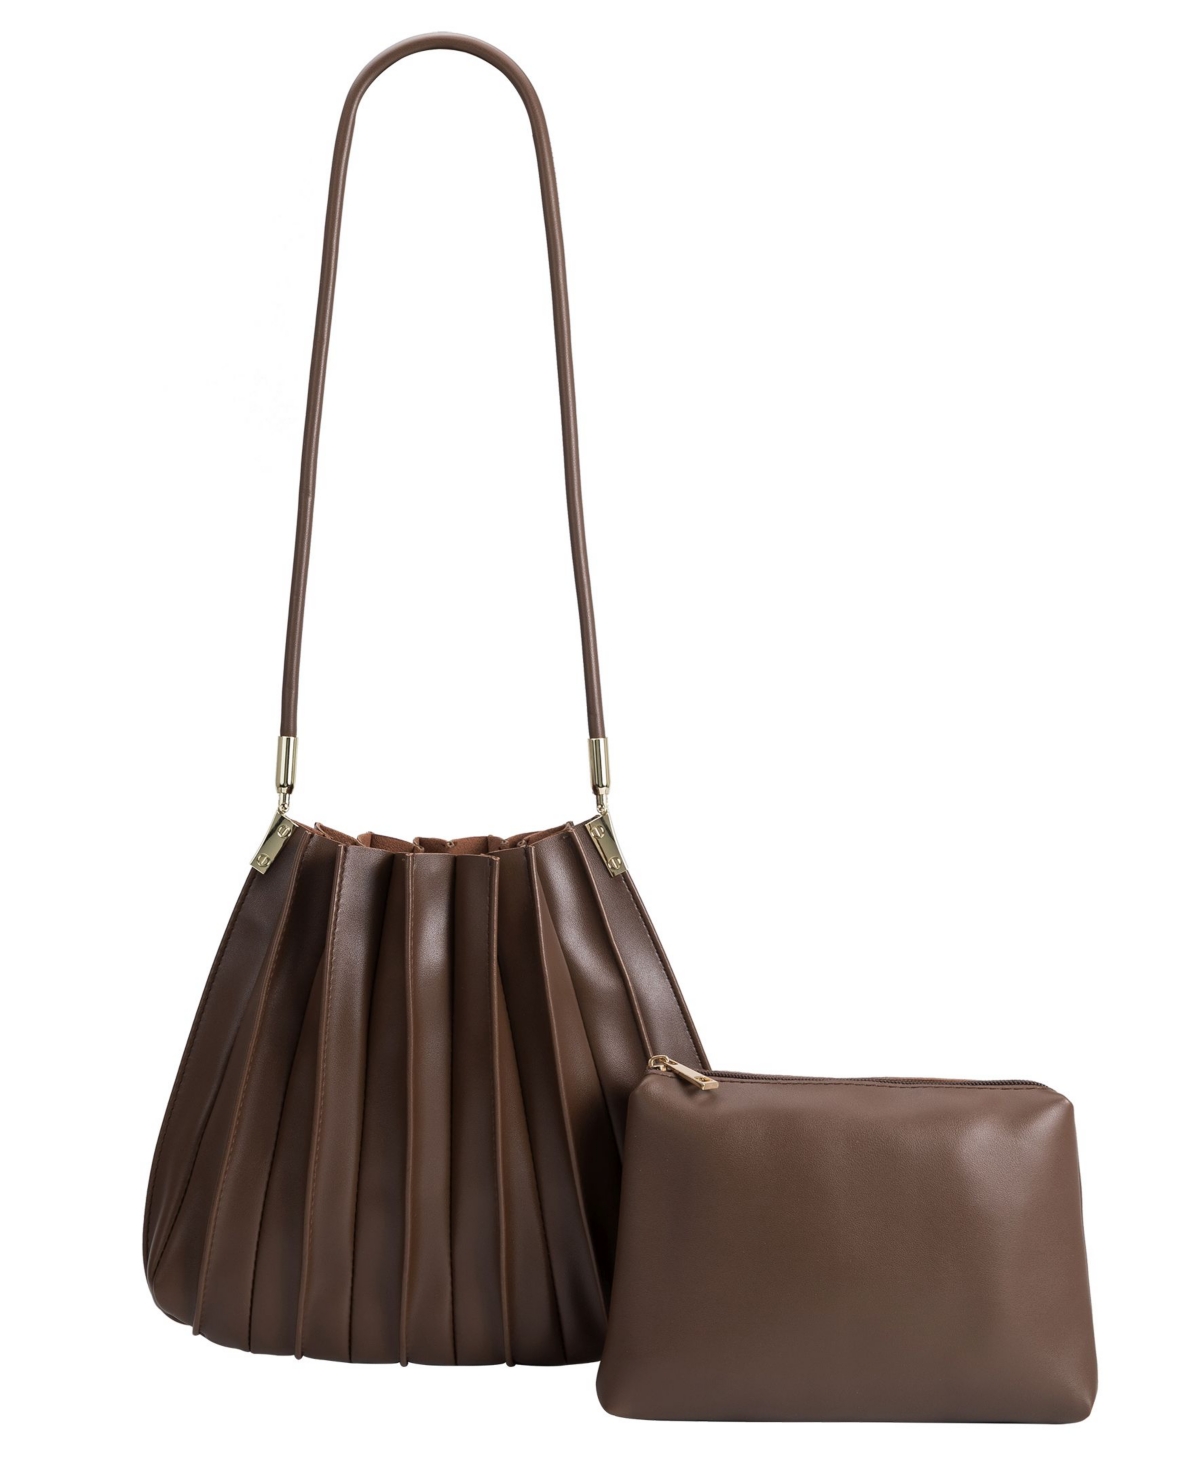 Carrie Pleated Faux Leather Shoulder Bag - Chocolate